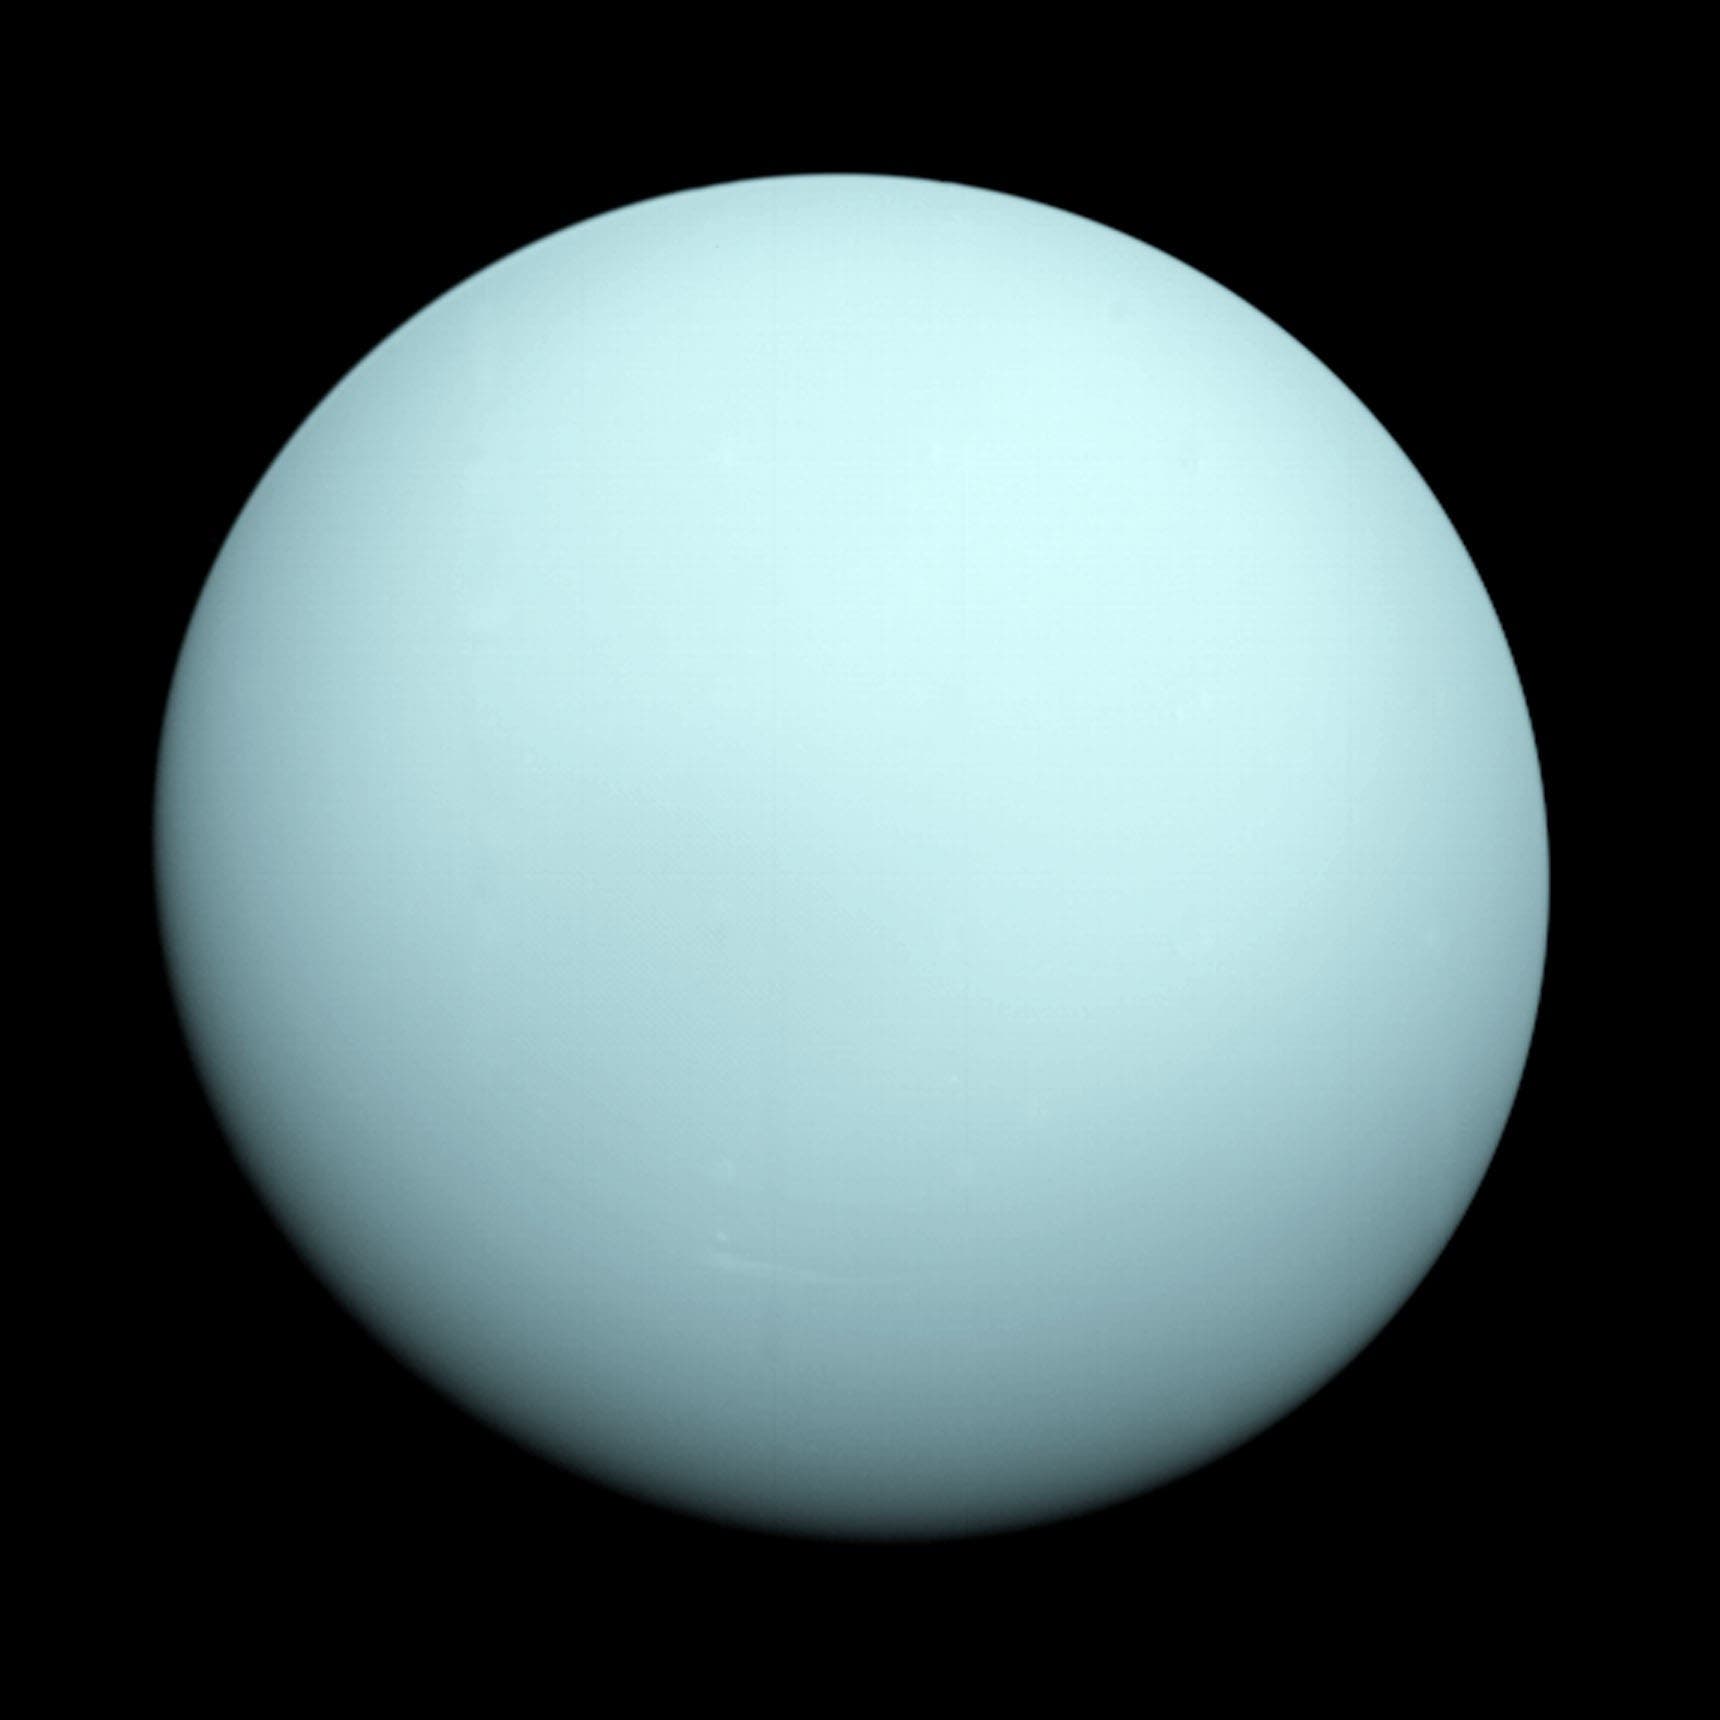 Uranus as a featureless disc, photographed by Voyager 2 in 1986. Credit: Wikimedia Commons.